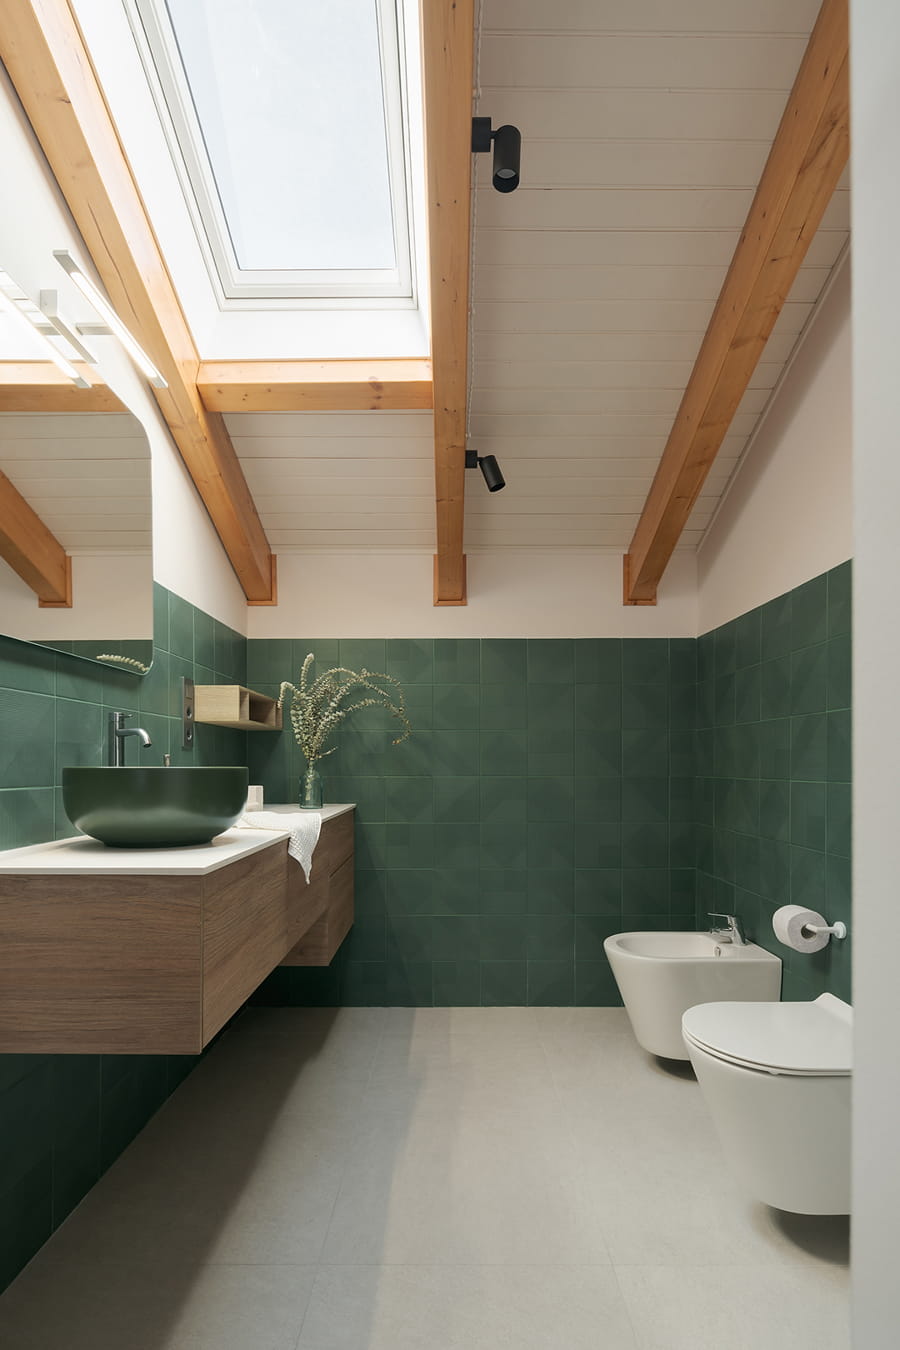 Modern bathroom with details in green.